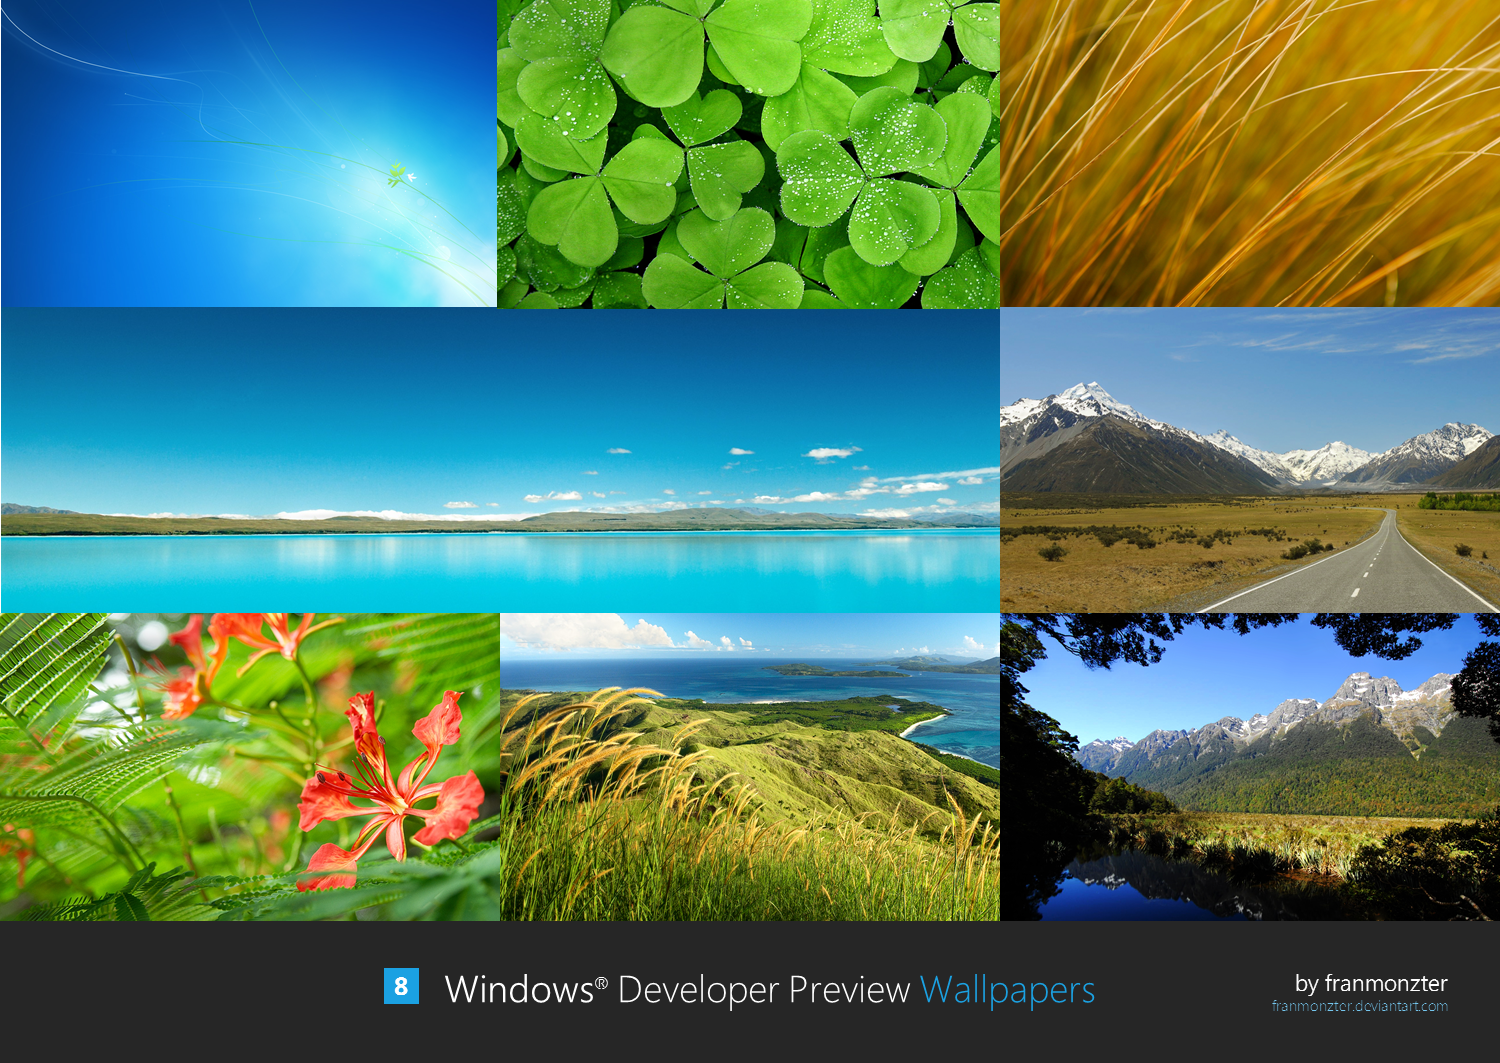 windows-developer-preview-wallpapers-by-arcticpaco-on-deviantart